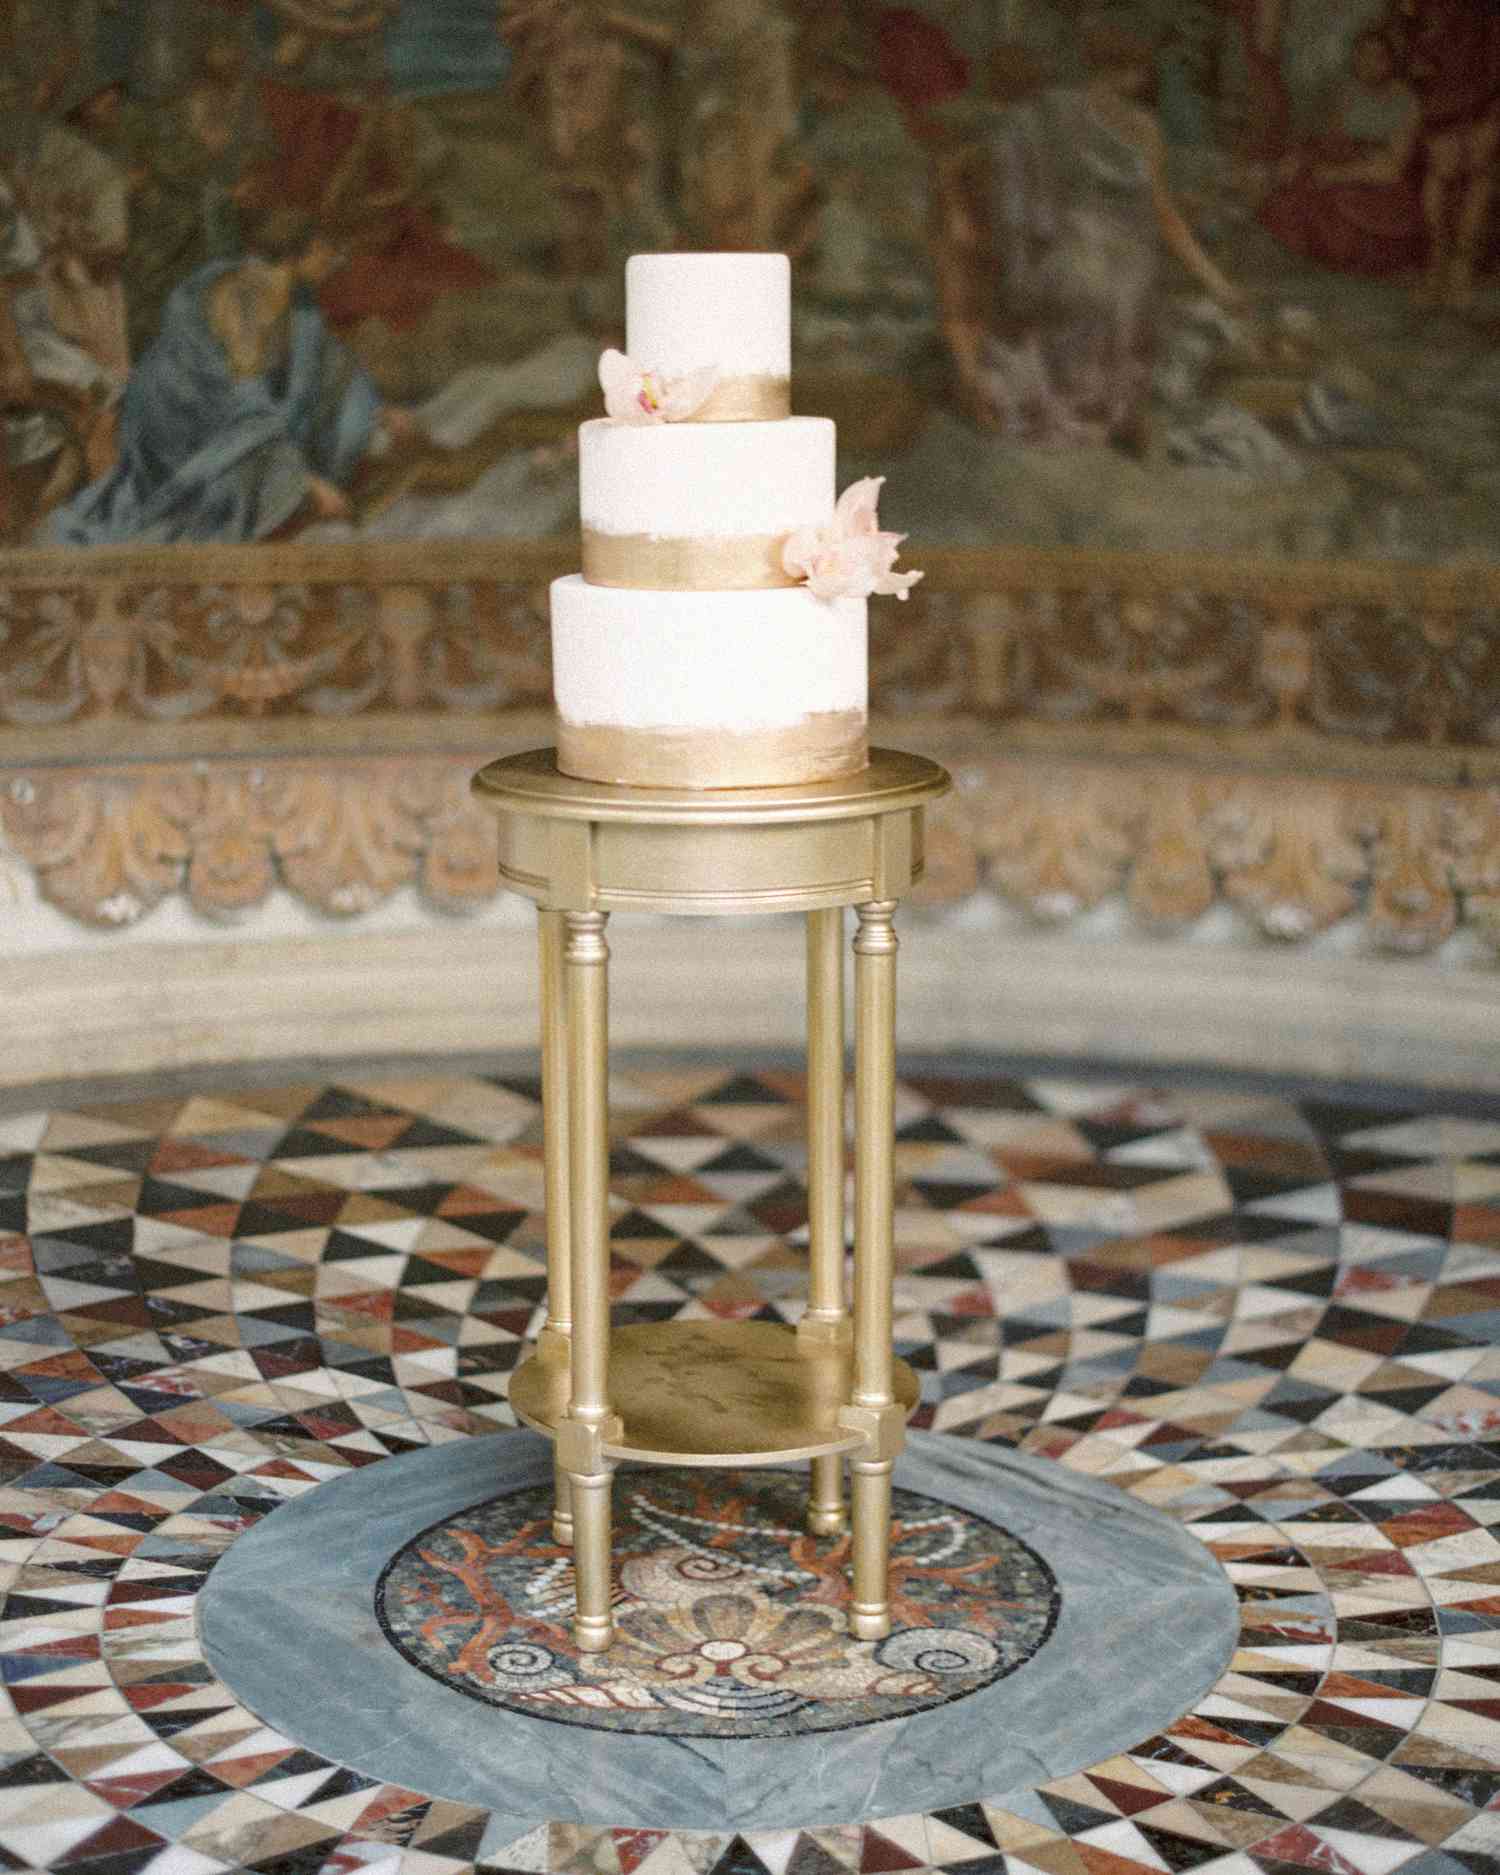 three tiered white wedding cake with gold foil accents and orchid decor